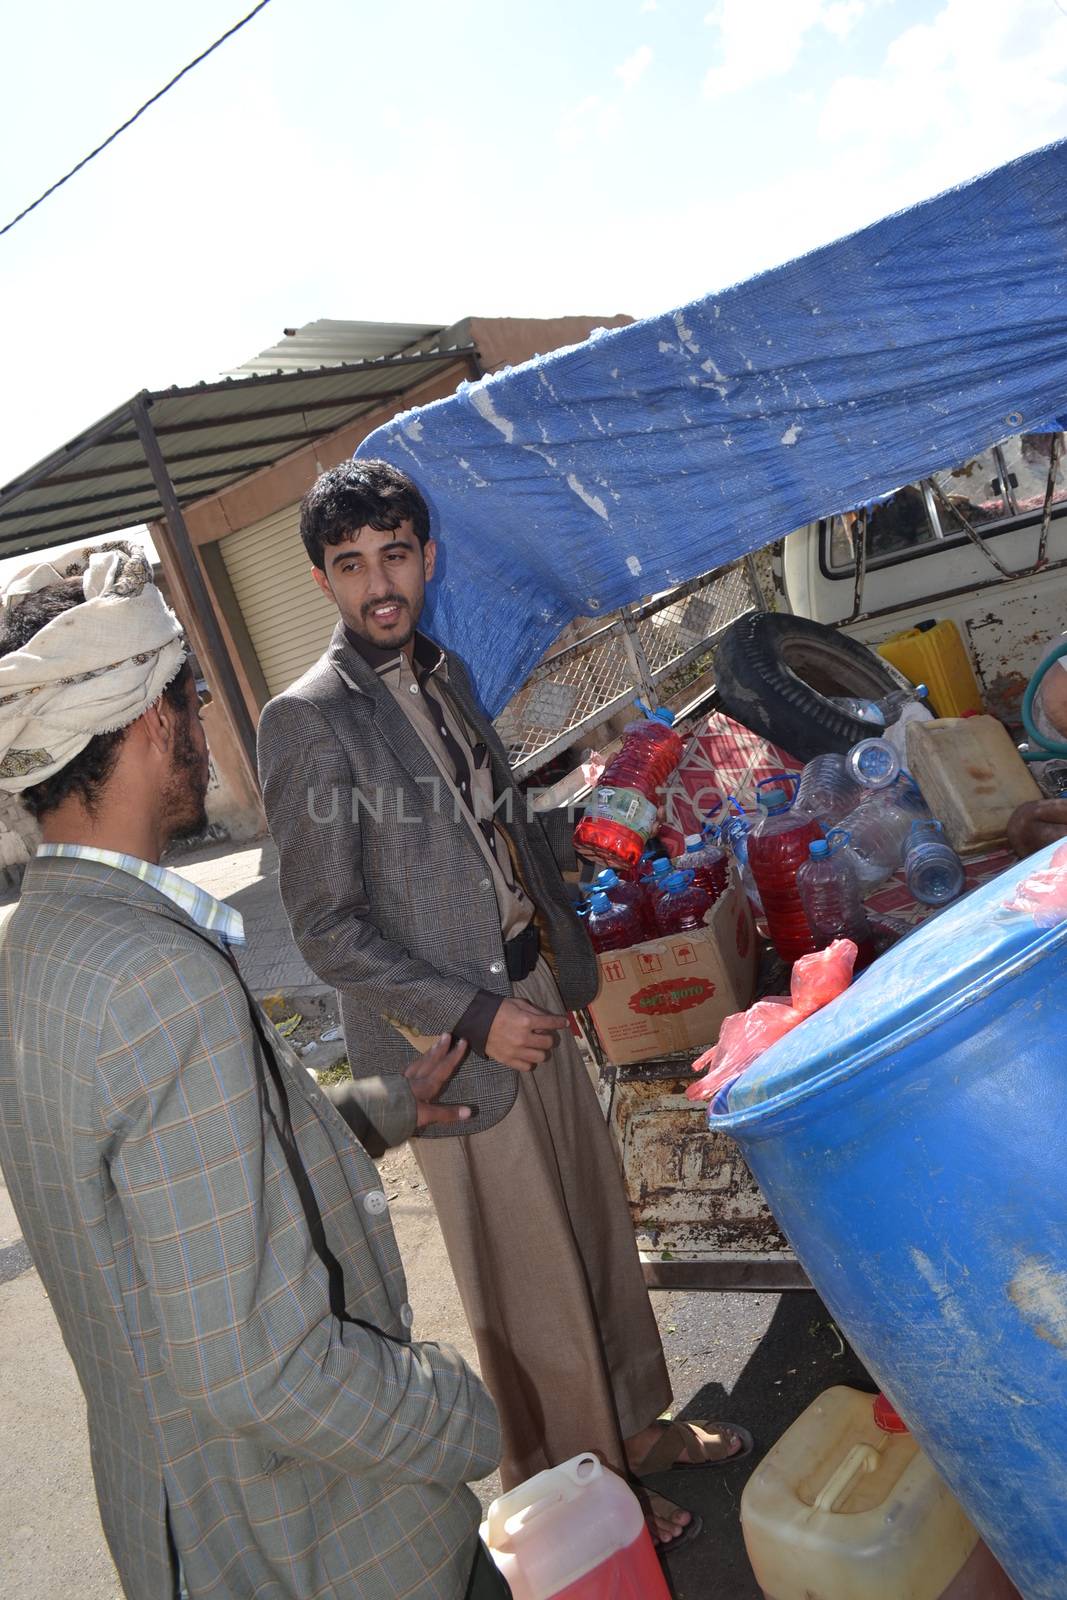 YEMEN, Sanaa: A black market dealer sells bottles of petrol in Sanaa, Yemen's capital, on November 7, 2015, as petrol stations have closed since the beginning of the war and Saudi bombings over the country.